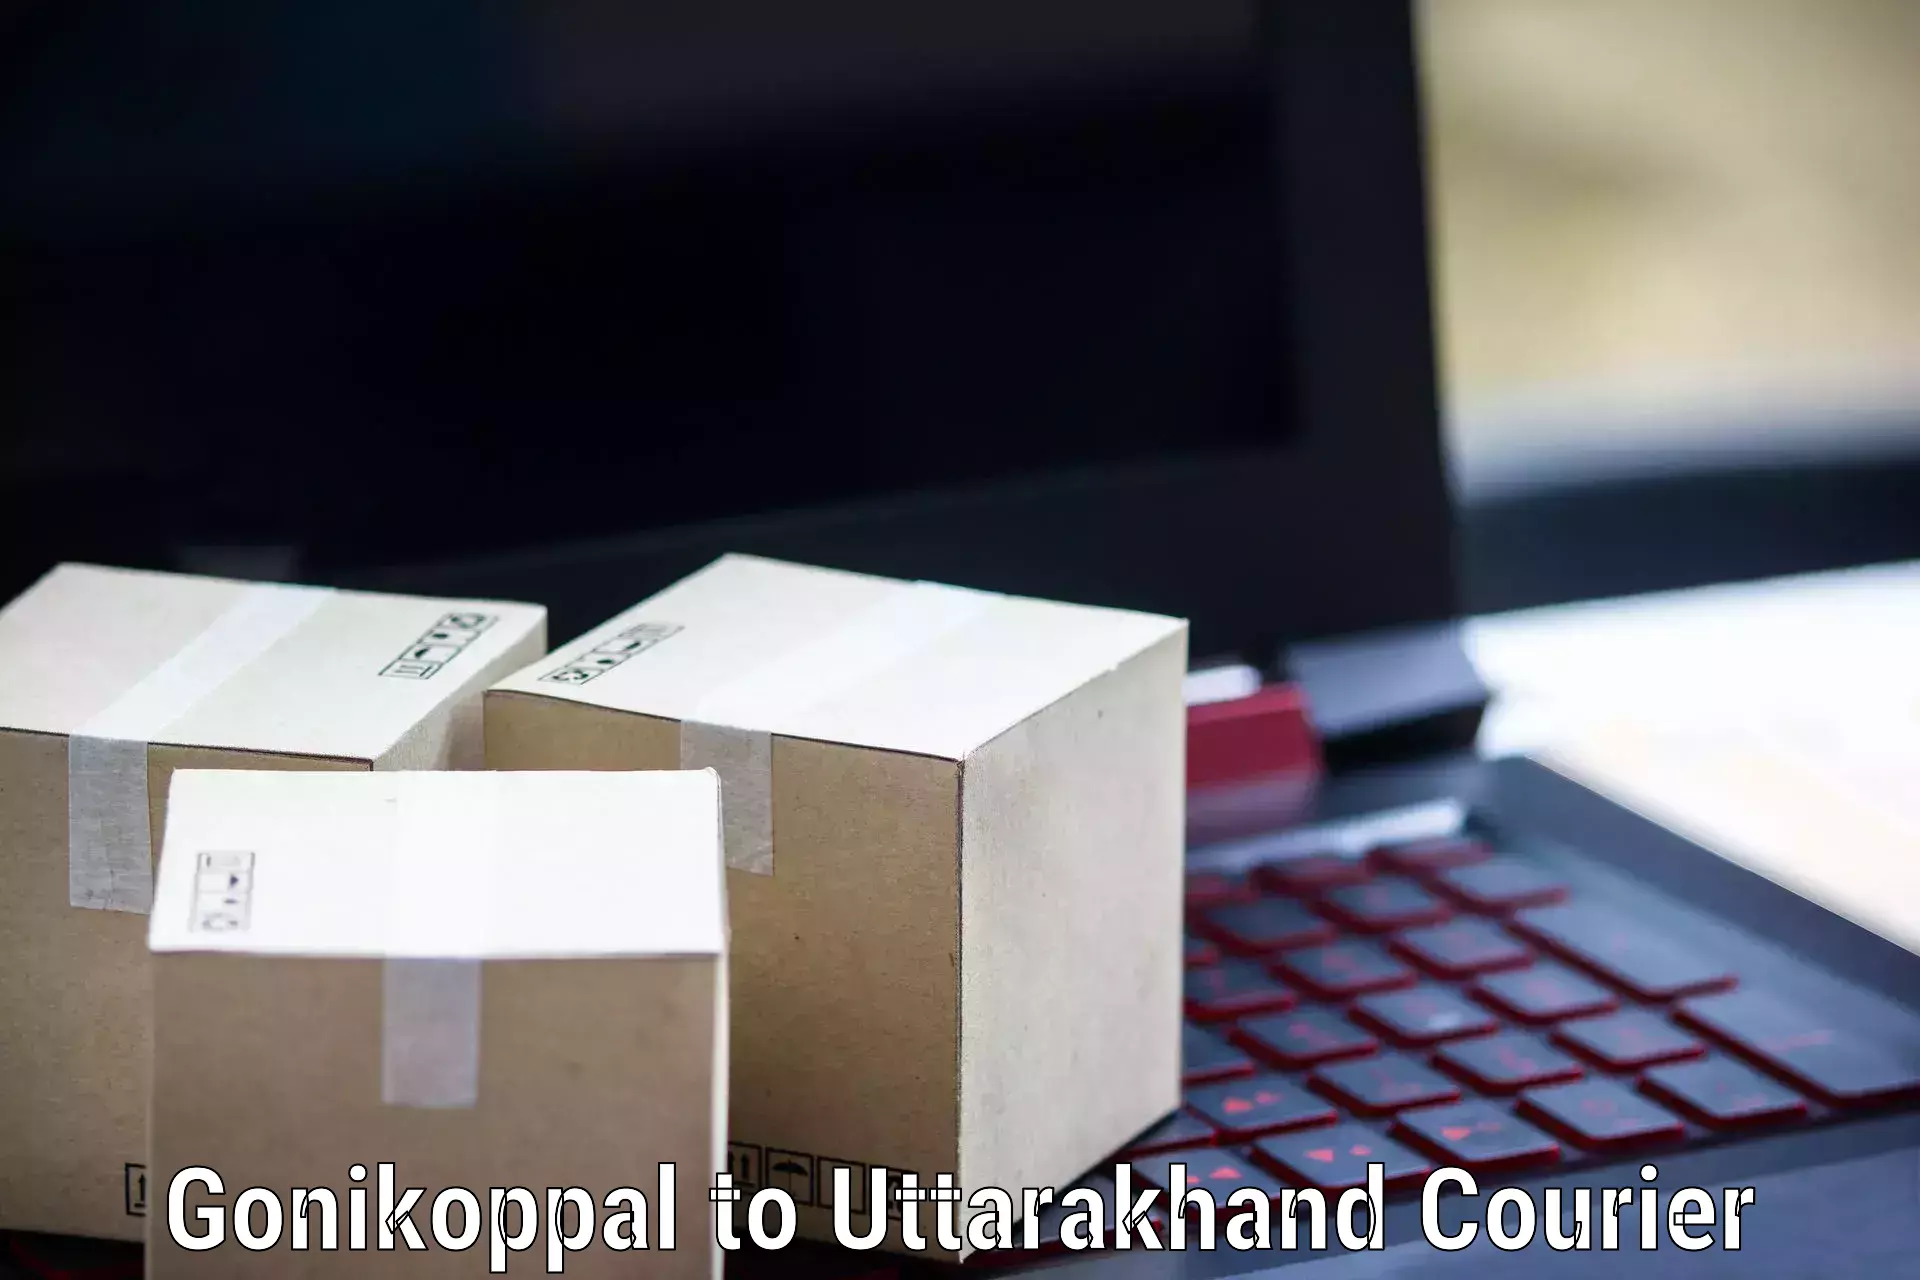 Courier service innovation Gonikoppal to Almora